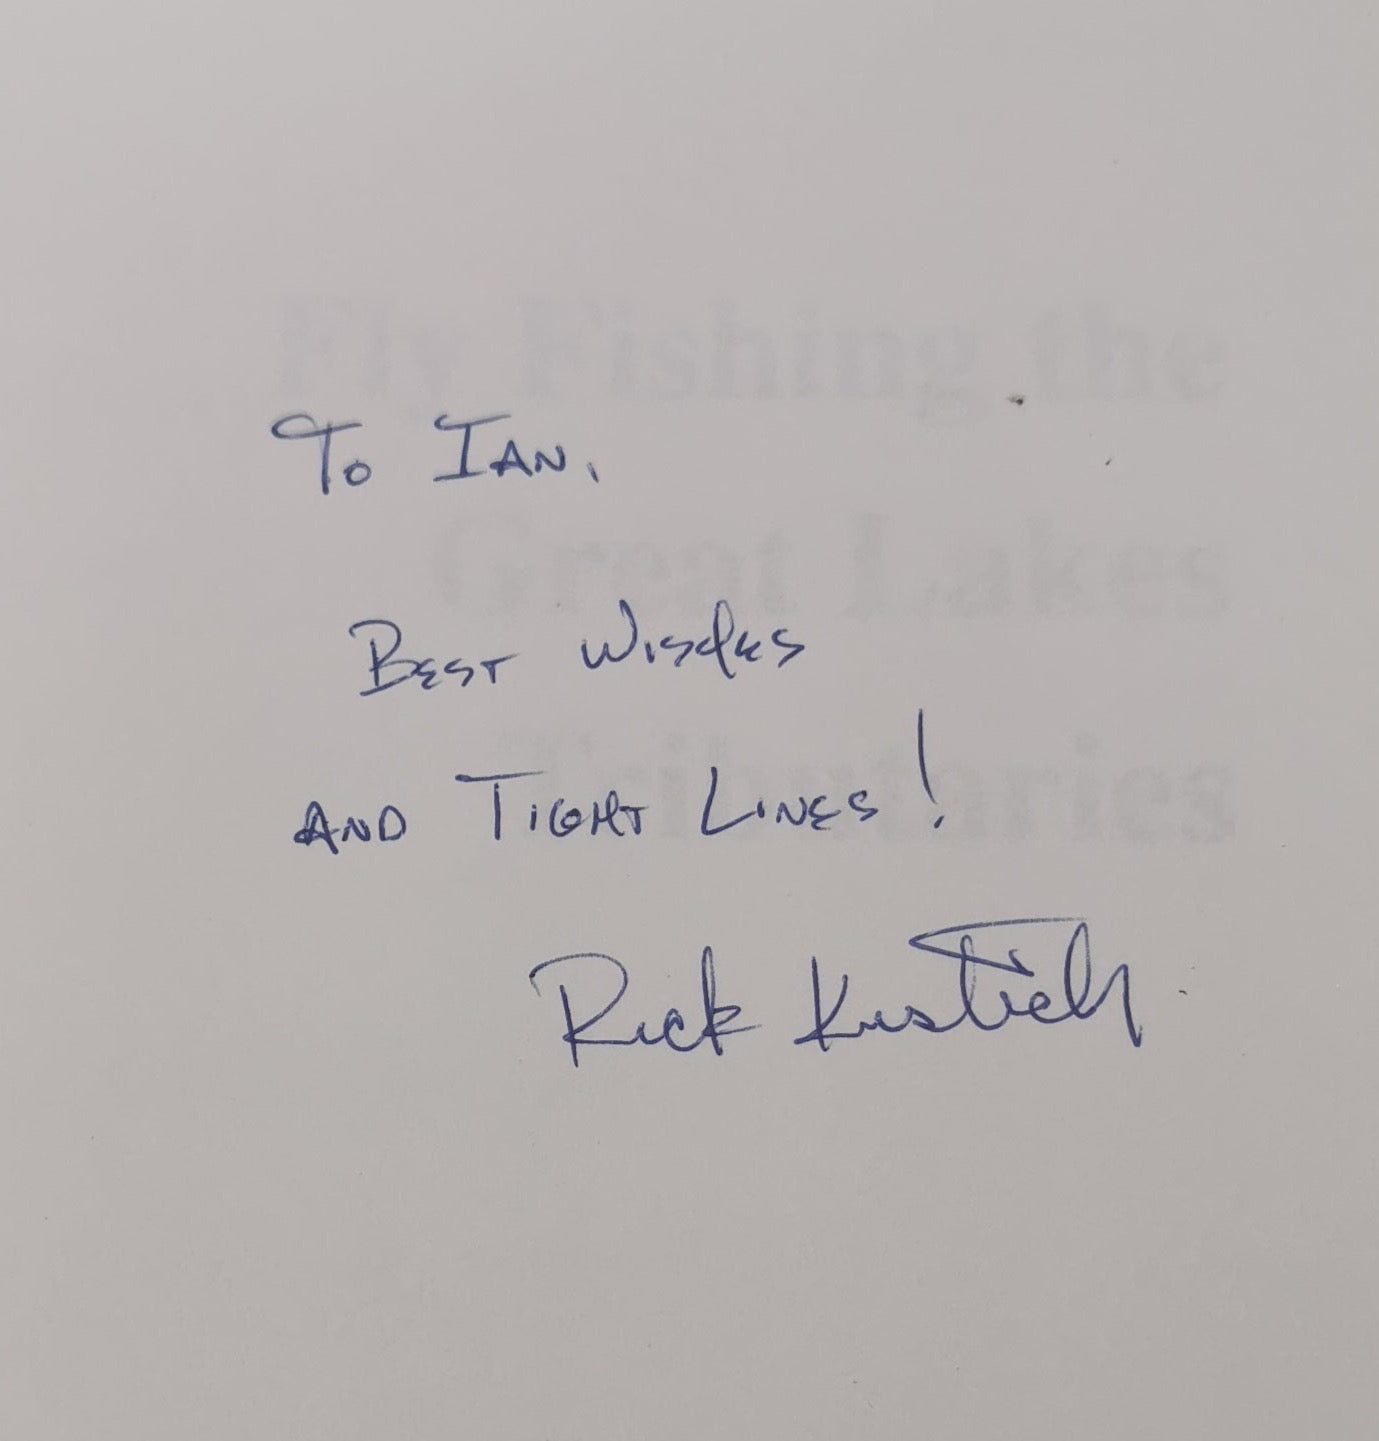 Fly Fishing the Great Lakes Tributaries - Signed Copy